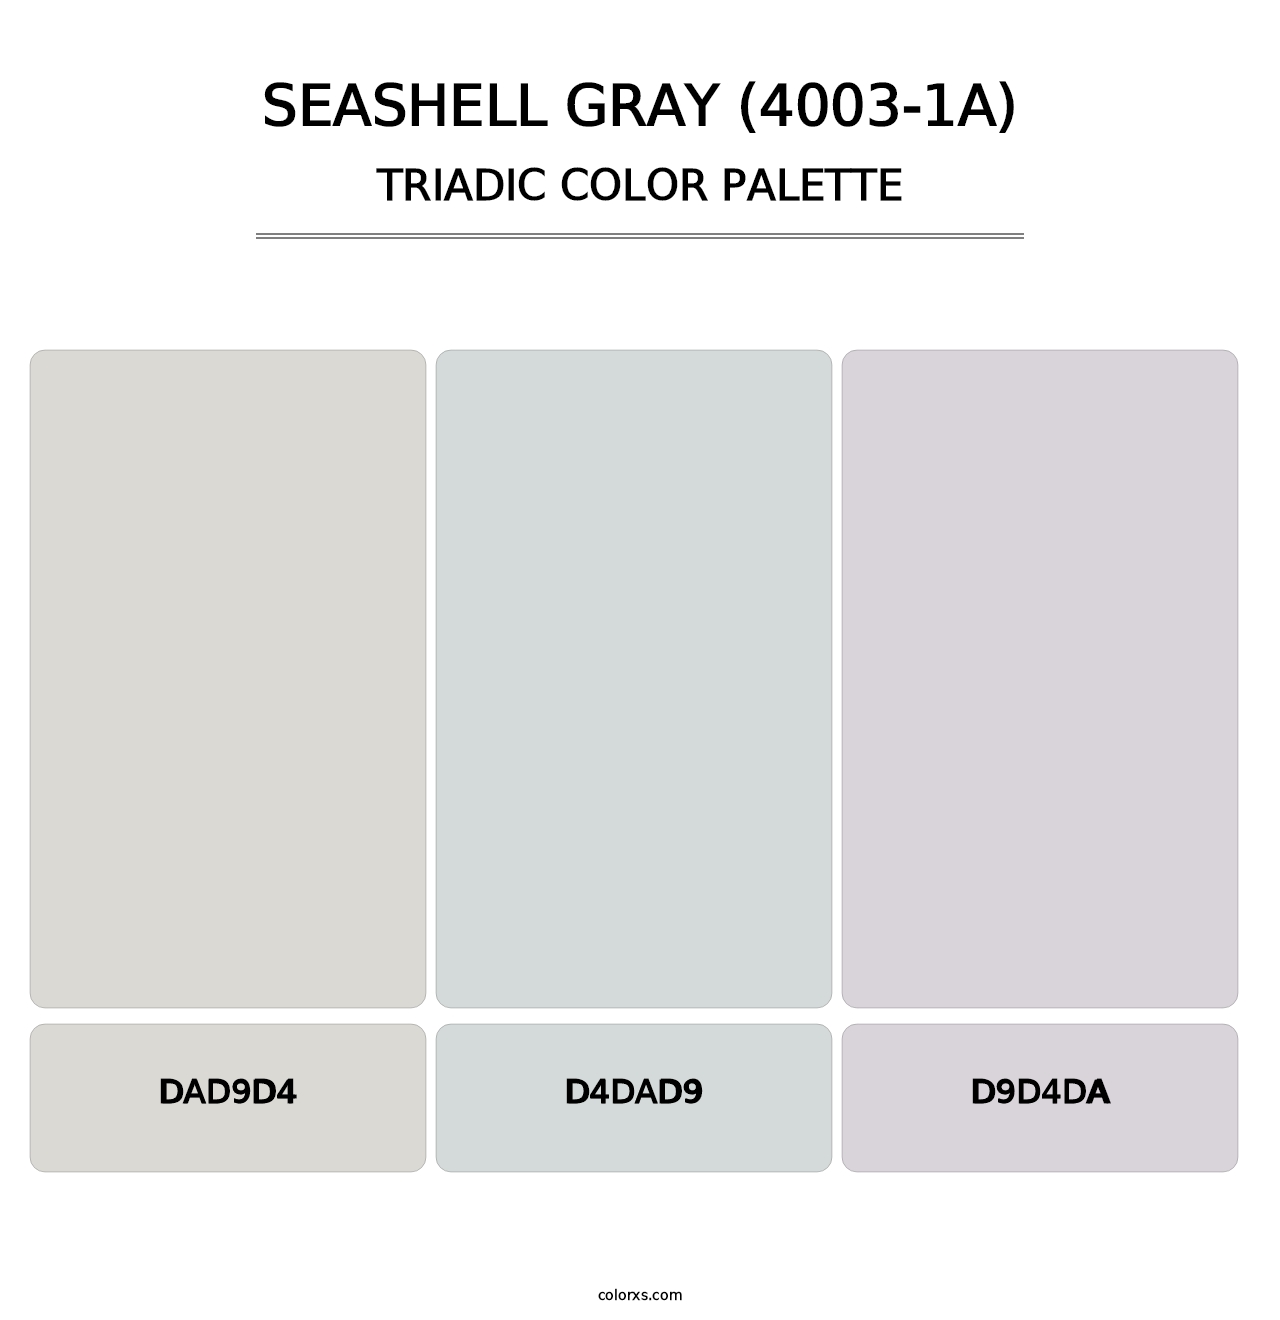 Seashell Gray (4003-1A) - Triadic Color Palette